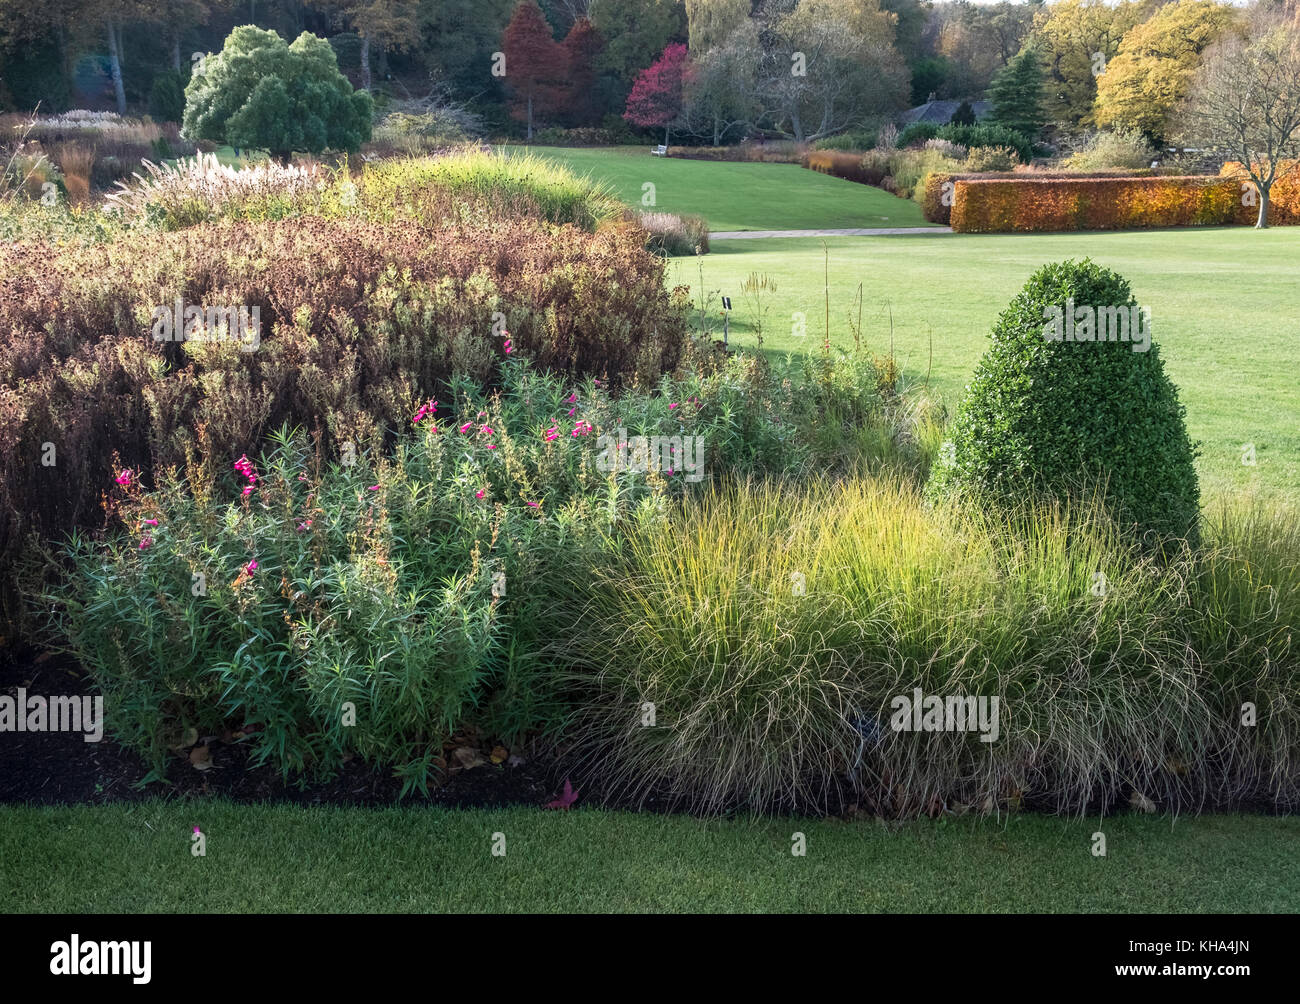 A large landscaped garden in autumn, featuring perennial border plants, trees and evergreen shrubs, Harlow Carr Garden, Harrogate, Yorkshire UK Stock Photo